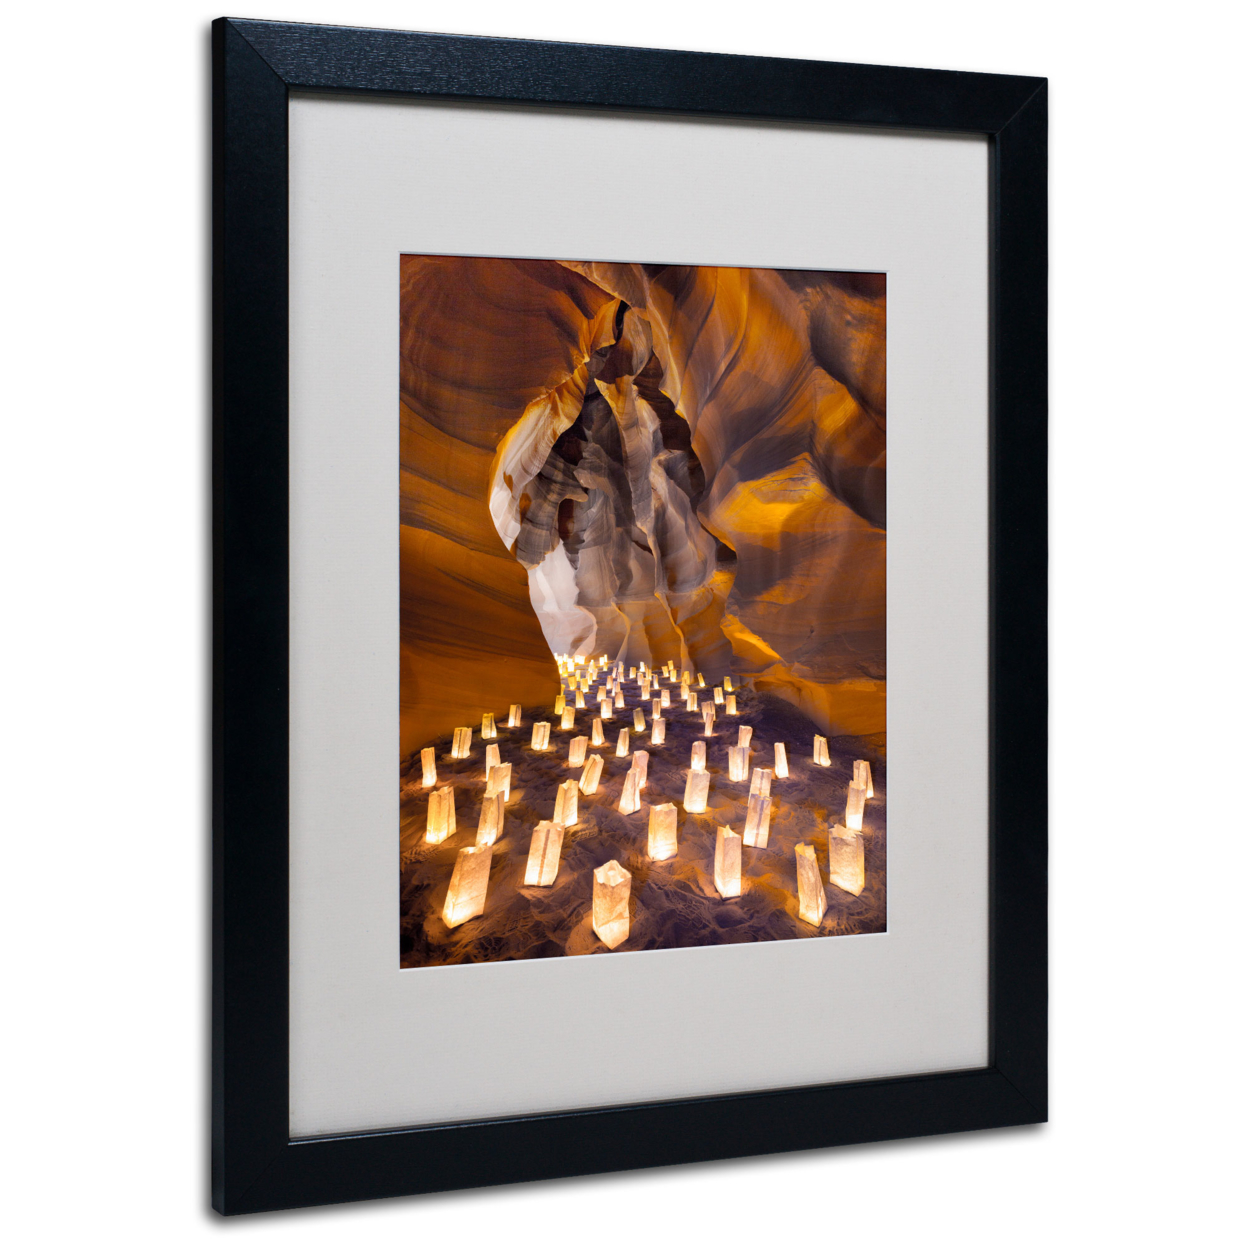 Moises Levy 'Candle Canyon I' Black Wooden Framed Art 18 X 22 Inches